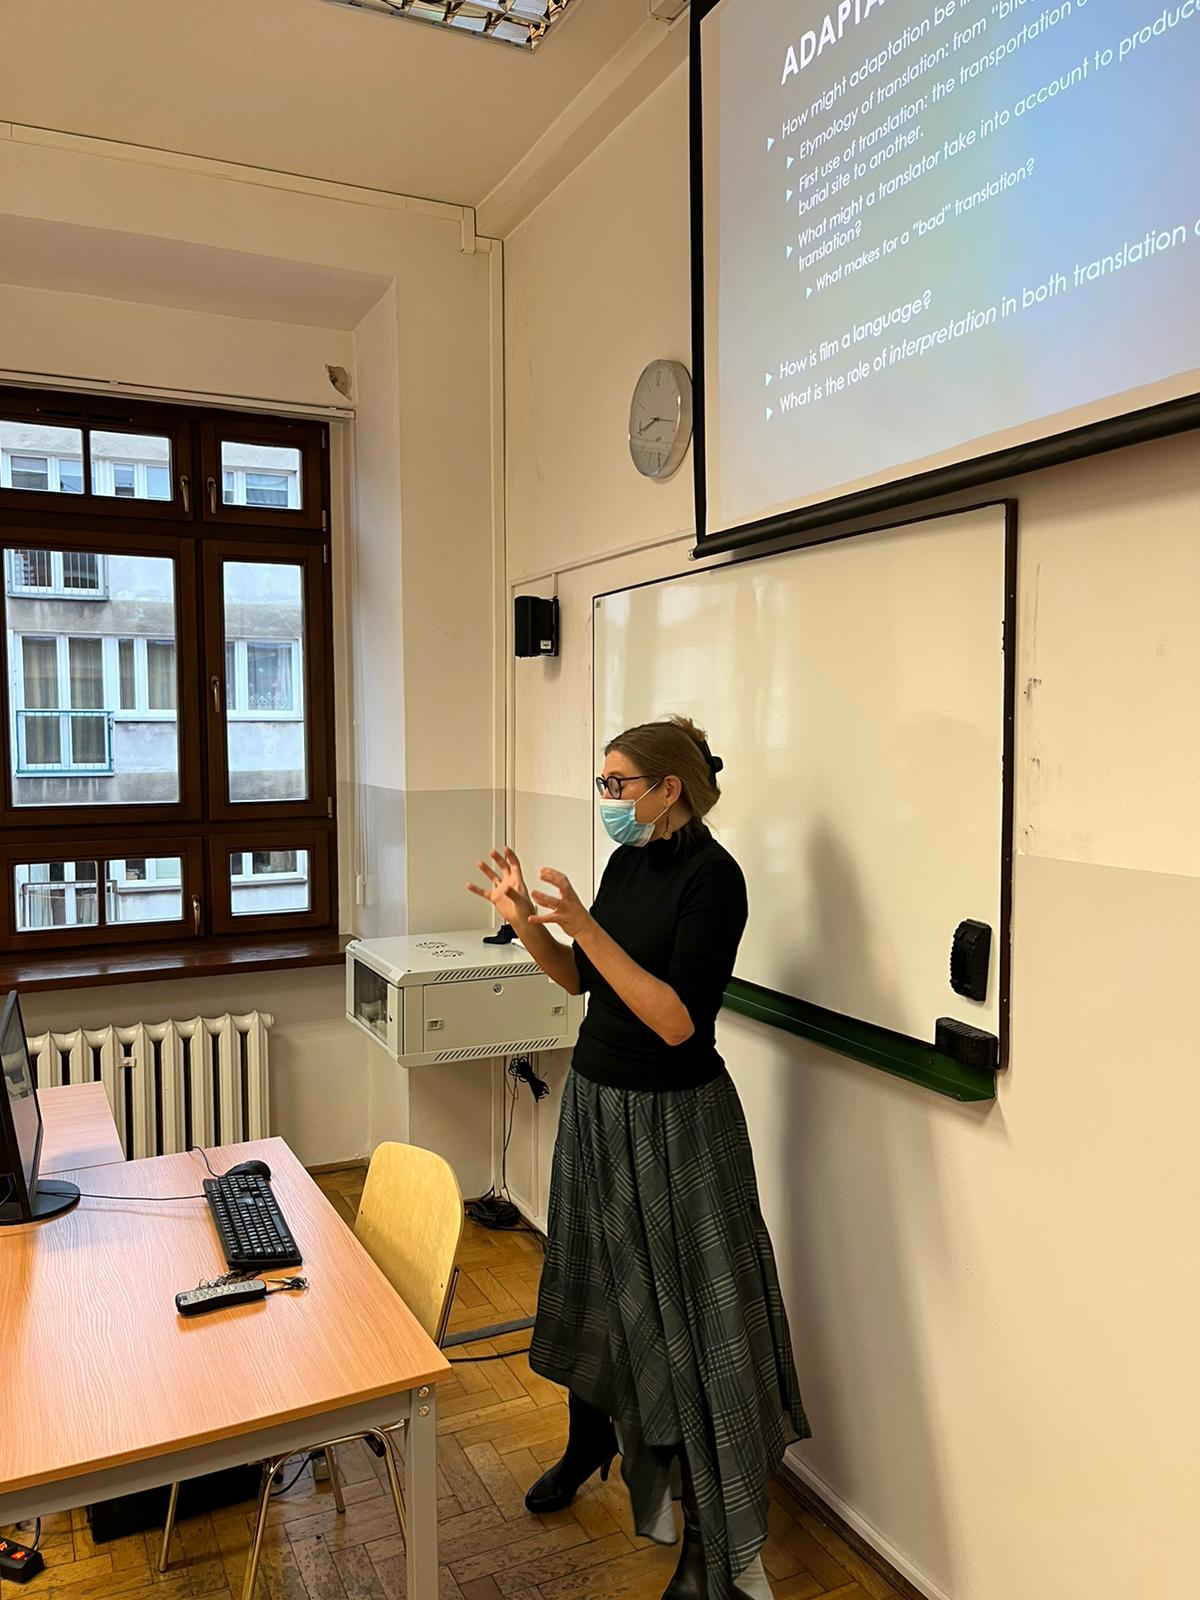 A. Ulanowicz Guest Lecturing in Wroclaw